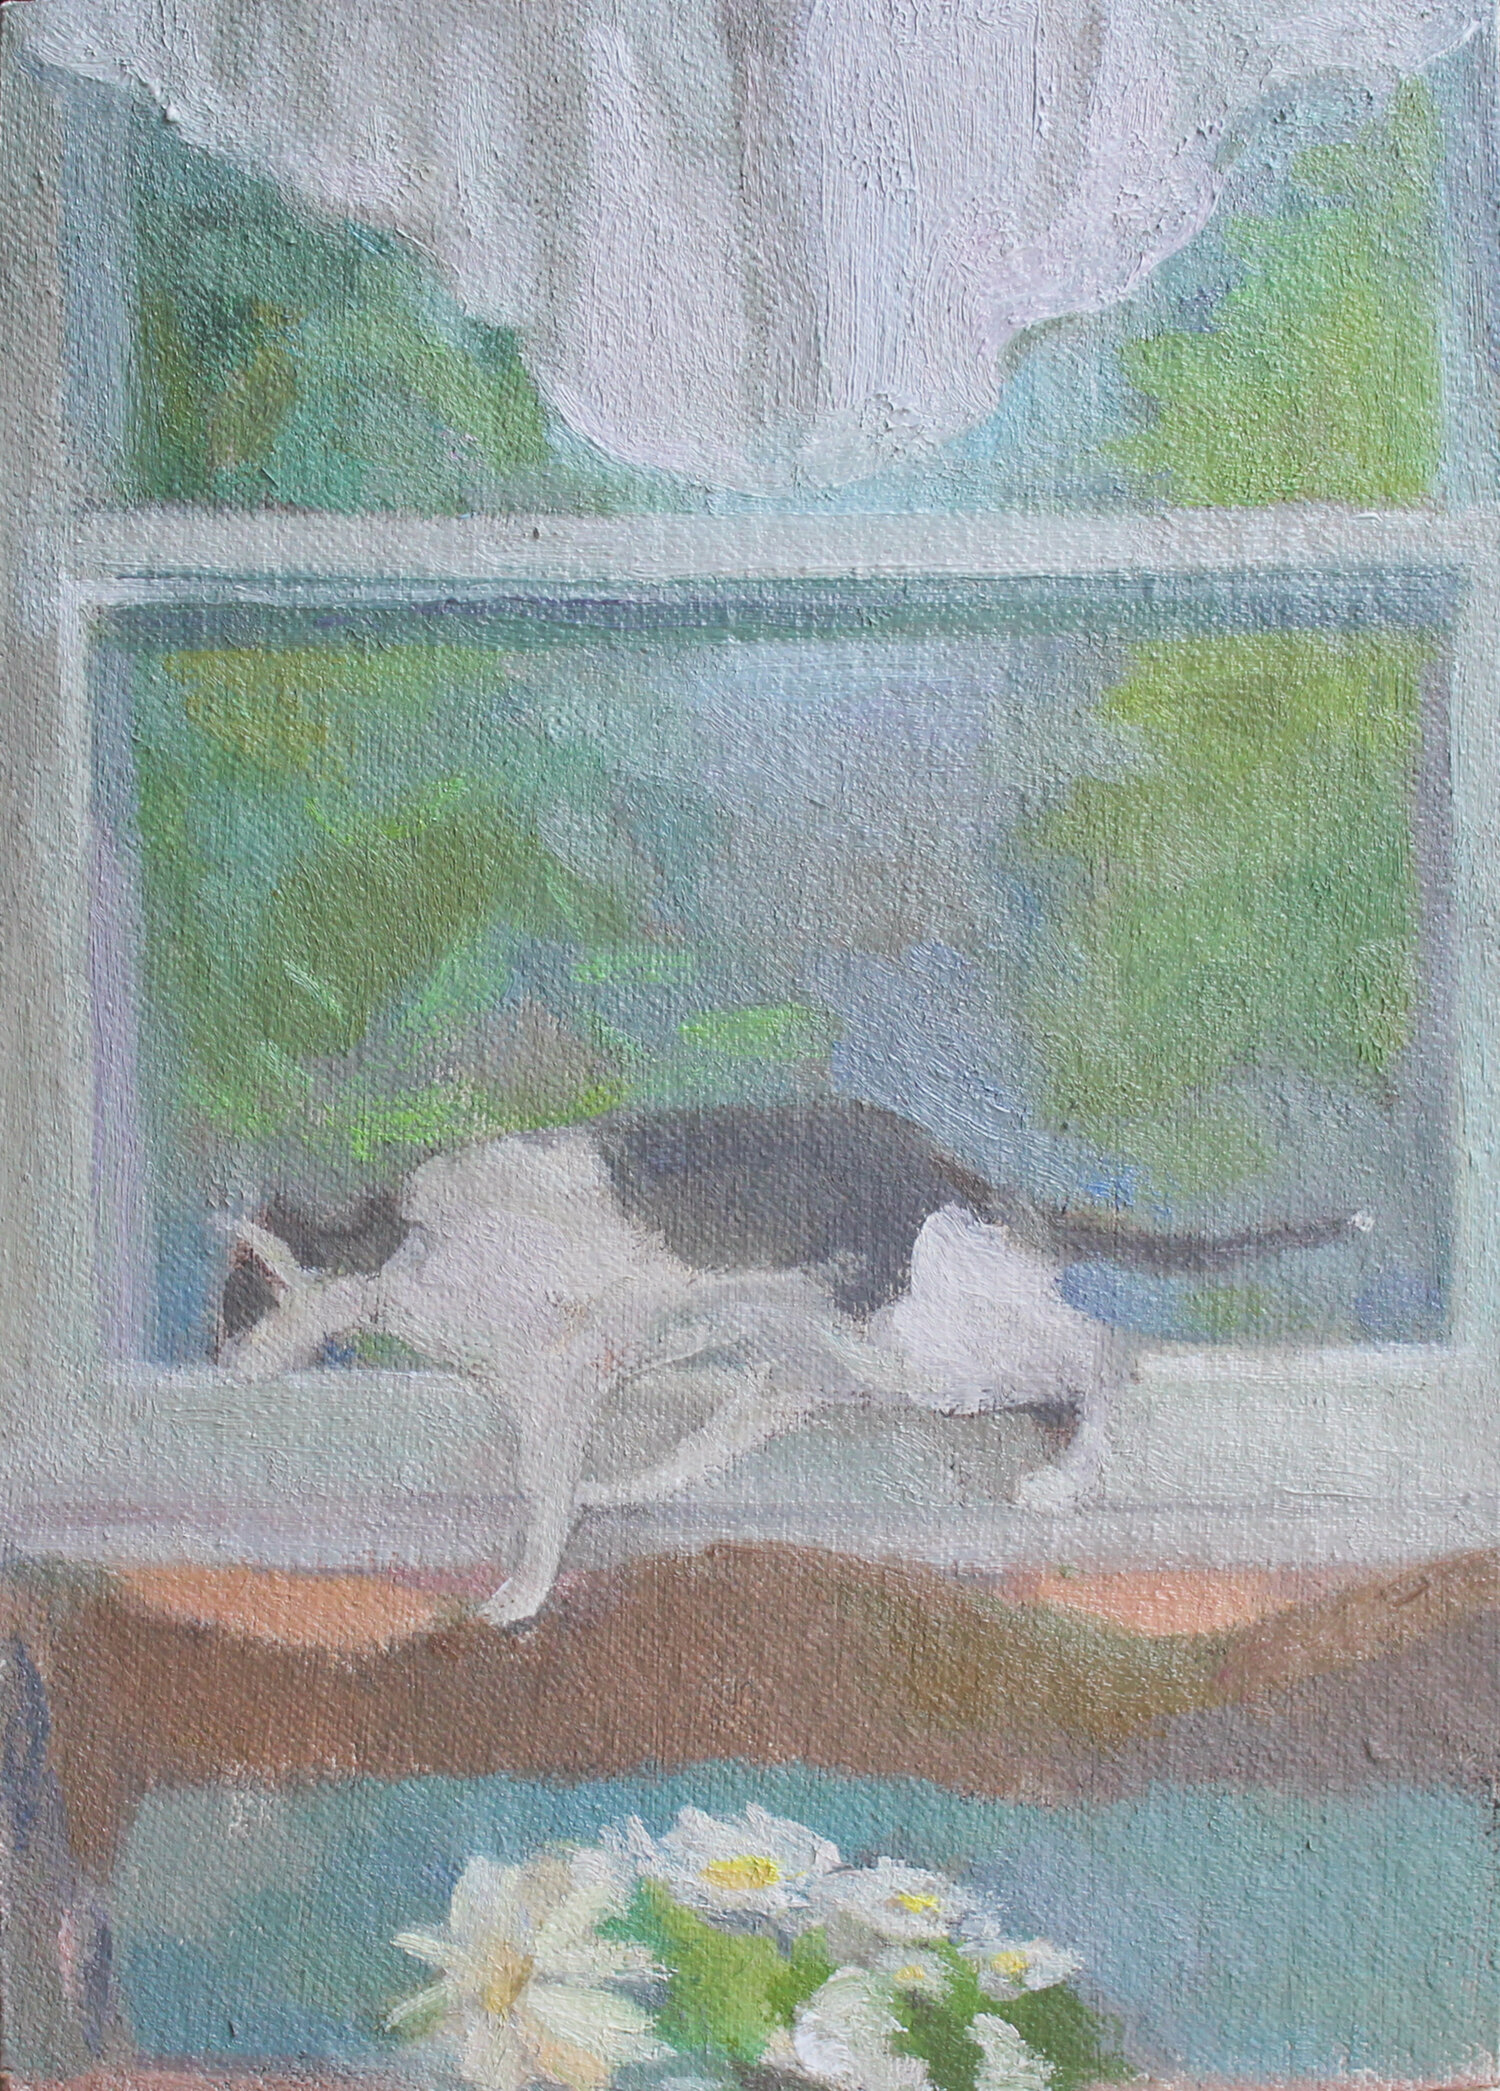    Window View with Jacques, Daisies, and Valance     6 x 8.25” oil on mounted canvas 2019  private collection Tennessee  